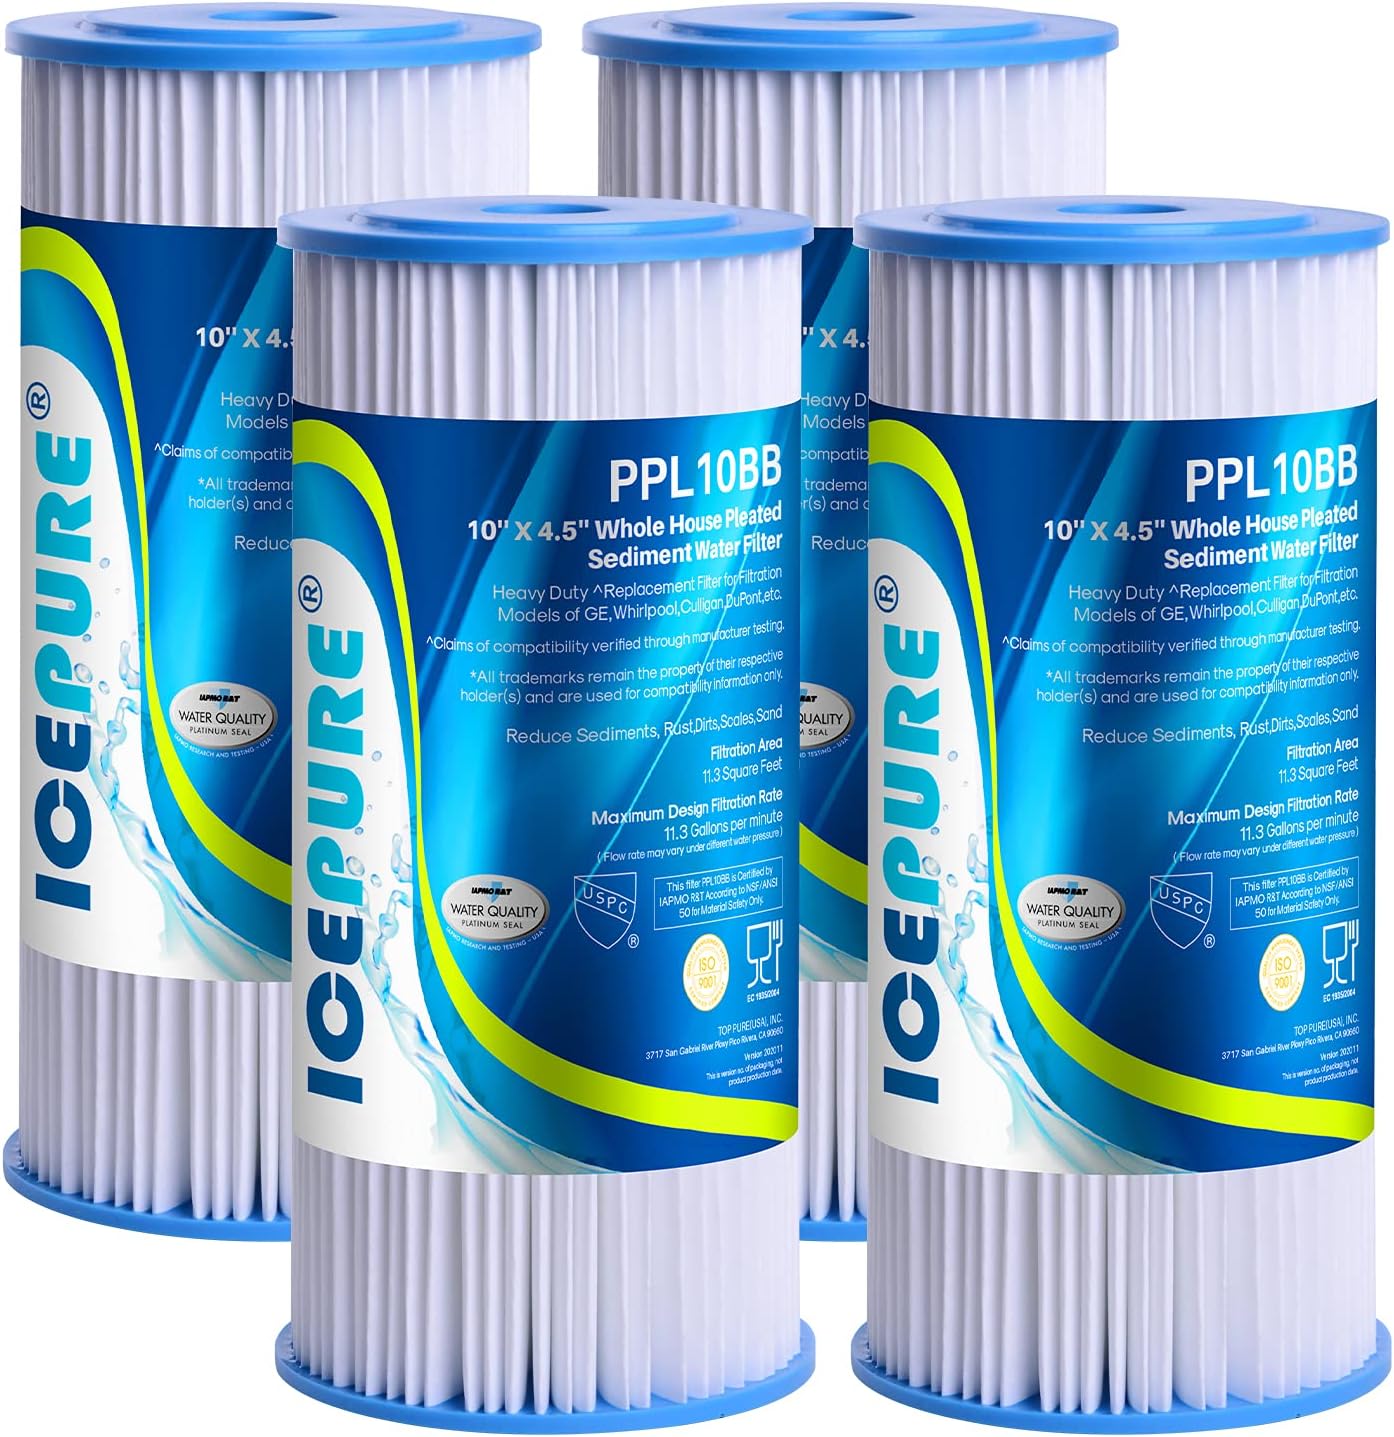 10″ x 4.5″ Whole House Pleated Sediment Water Filter Replacement for GE FXHSC, Culligan R50-BBSA, Pentek R50-BB, DuPont WFHDC3001, W50PEHD, GXWH40L, GXWH35F, for Well Water, Pack of 4